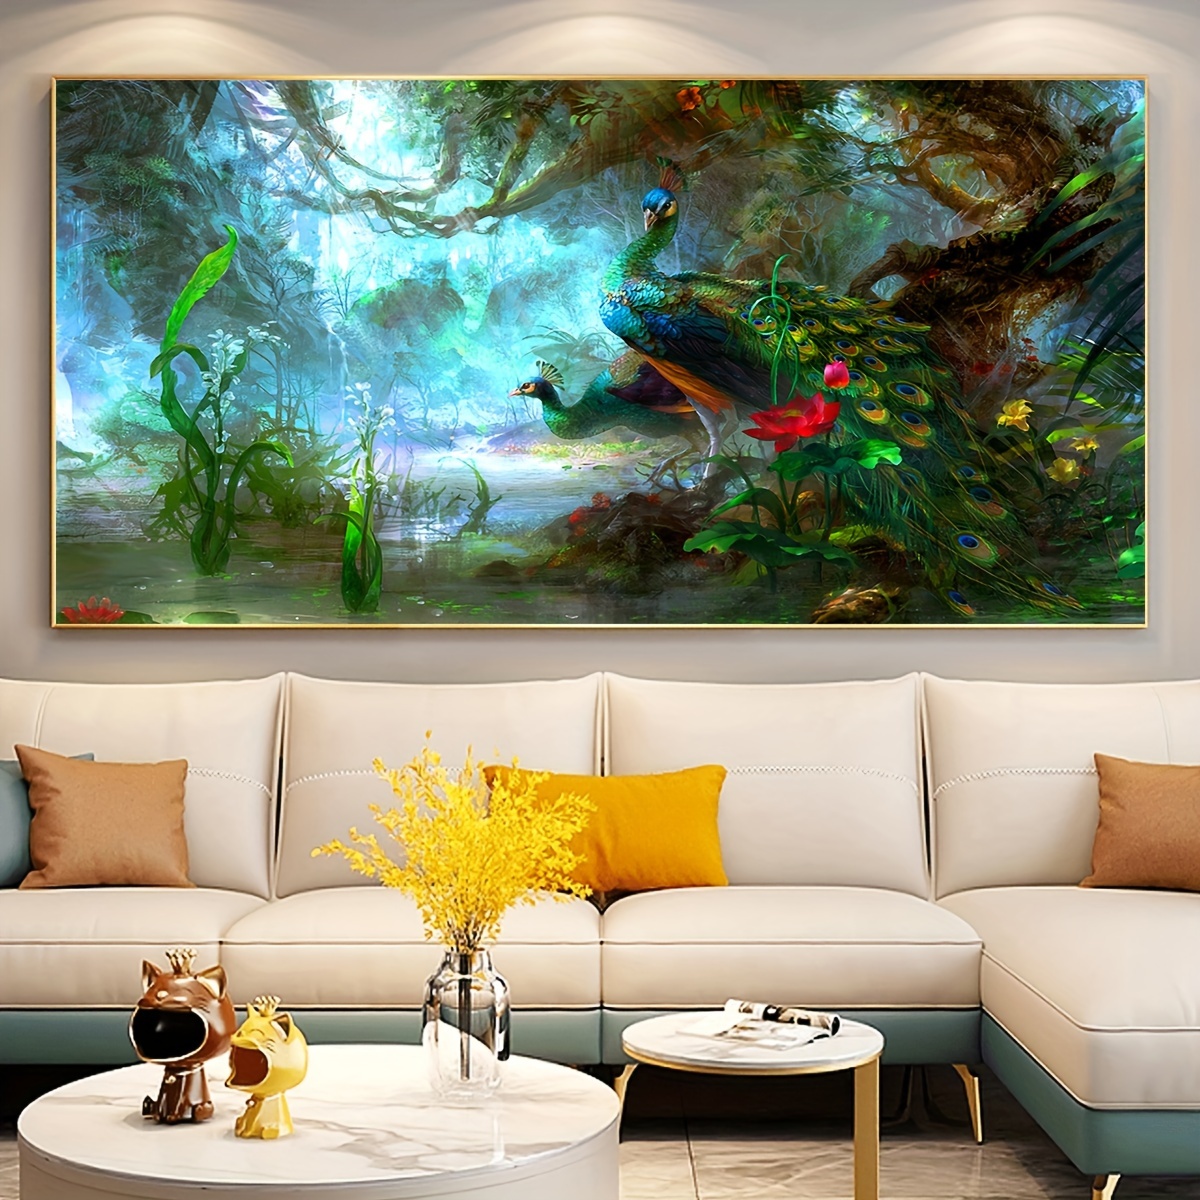 Peacock Feather Poster Nordic Living Room Wall Art Print Picture